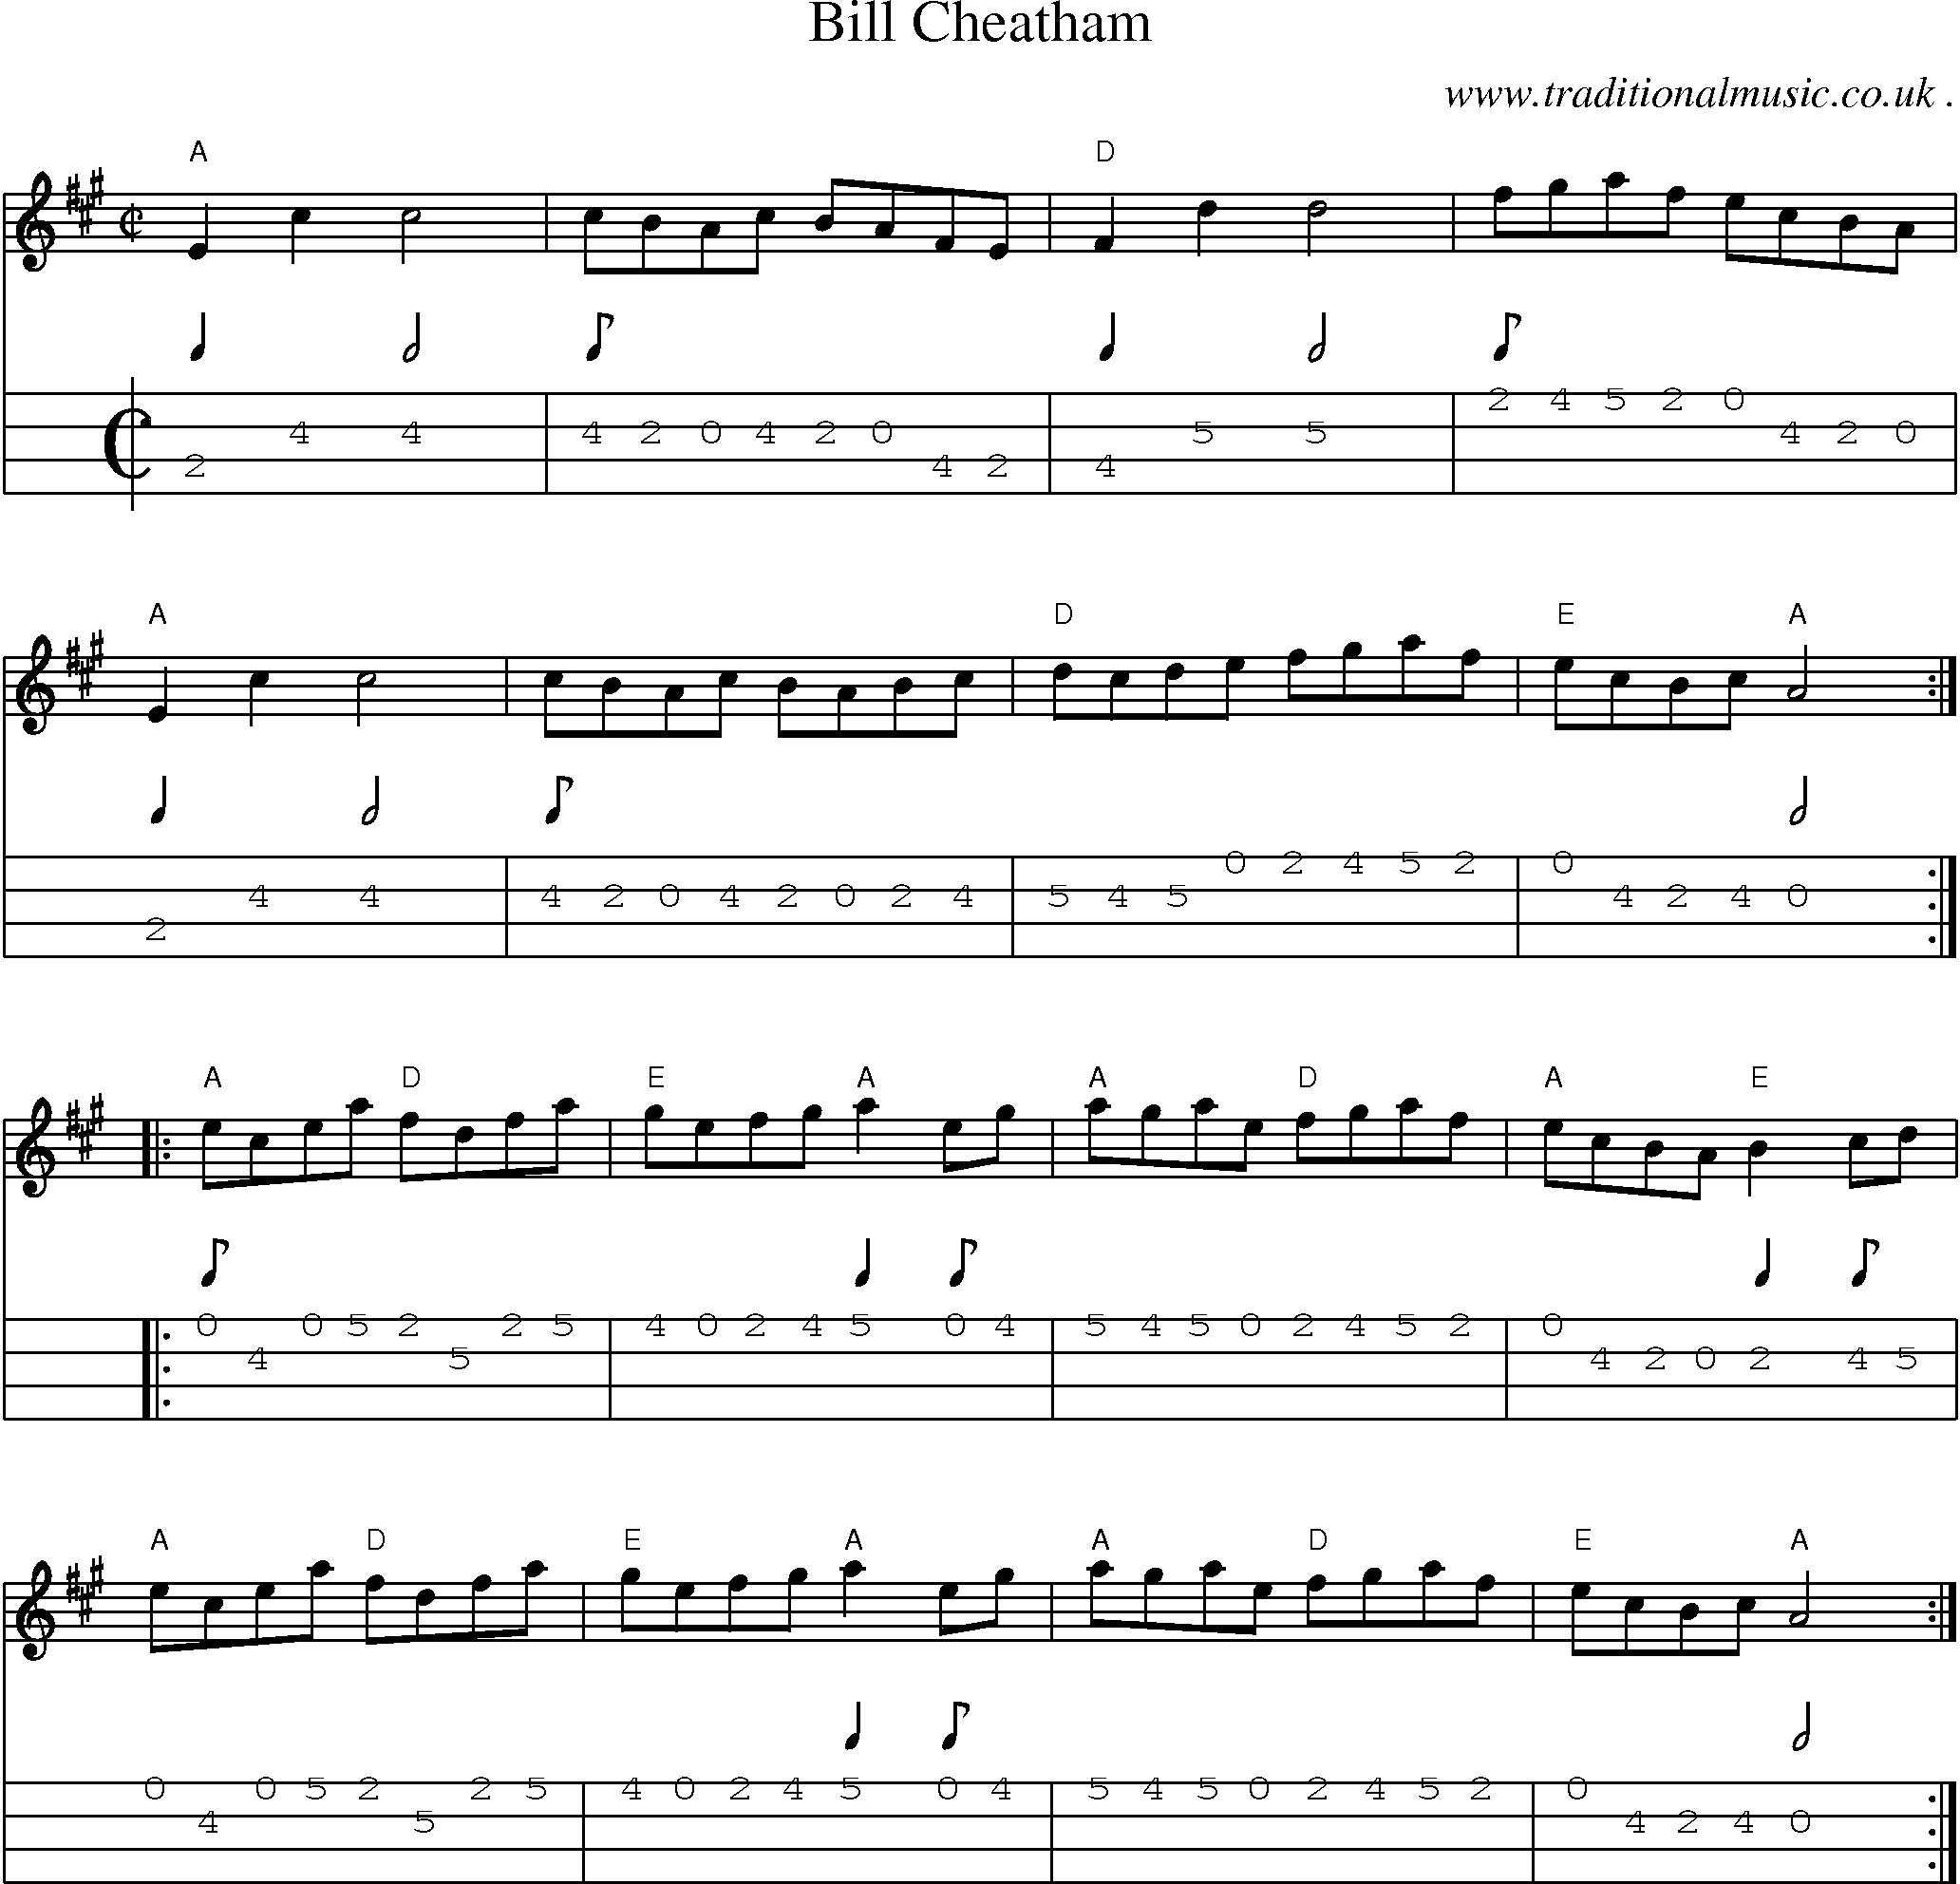 Music Score and Guitar Tabs for Bill Cheatham